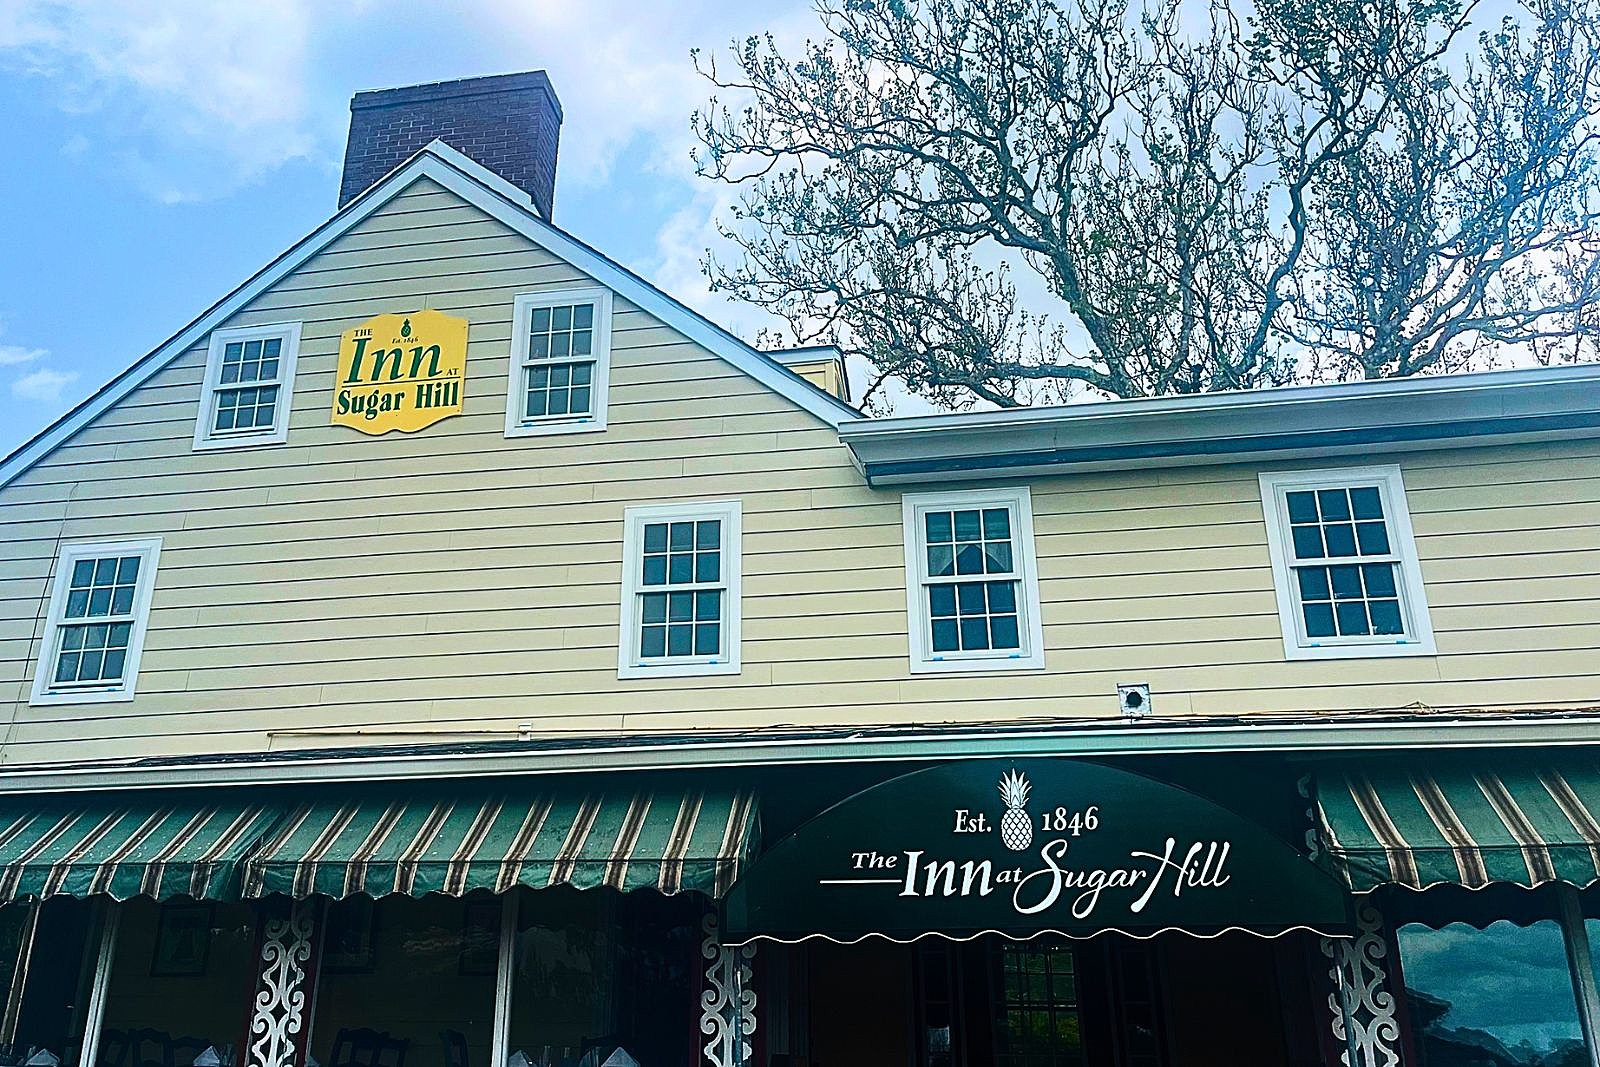 One of NJ's best dive bars is reopening under a new name